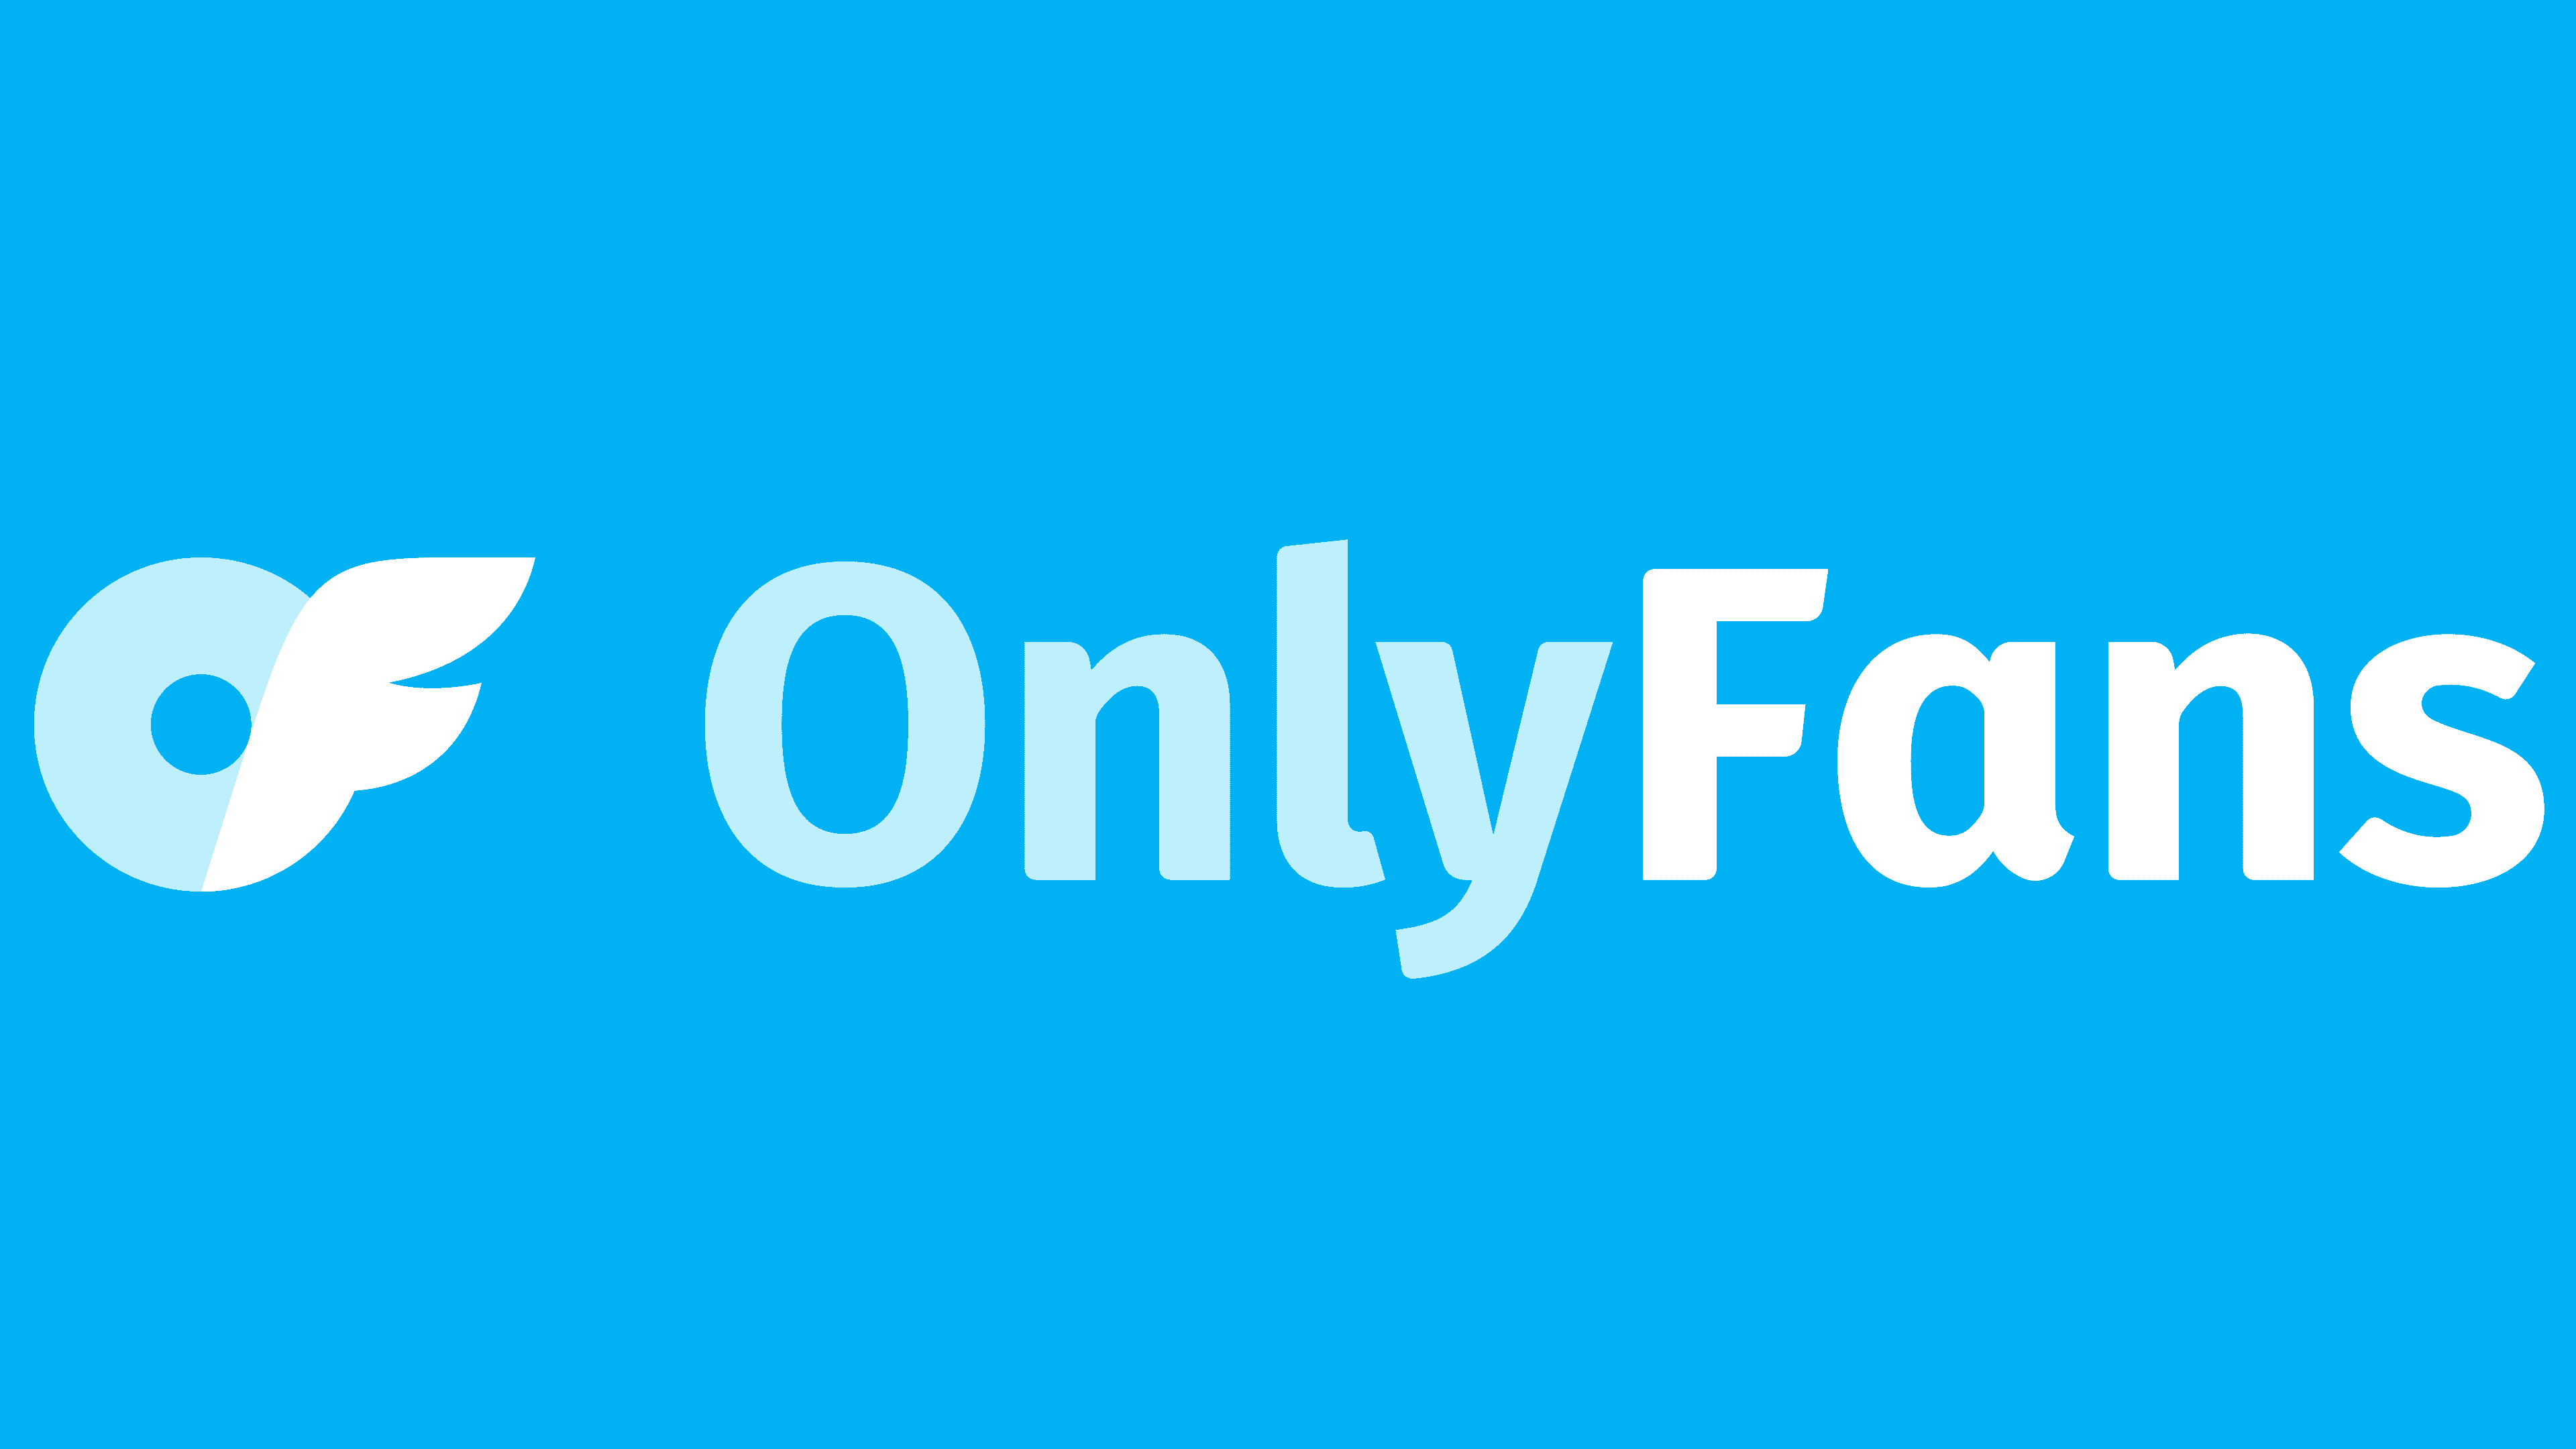 How to promote OnlyFans and get followers - Ultimate Guide